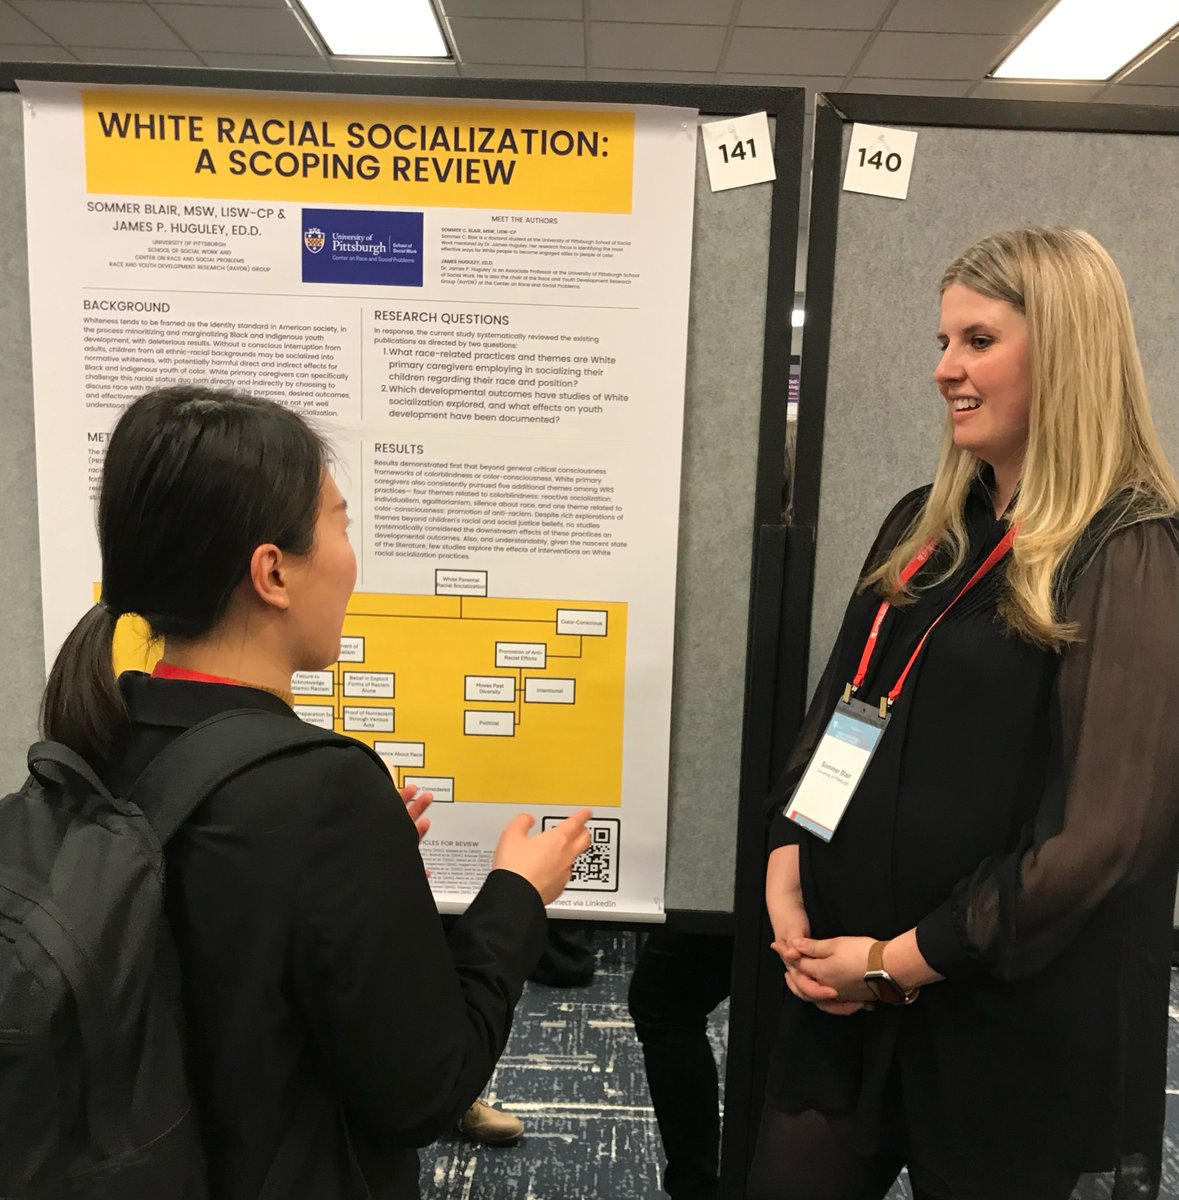 Congratulations to SSW Doctoral Student @sommer__blair and Associate Professor, @drjayhuguley! Yesterday they presented their work entitled “White Racial Socialization: A Scoping Review” at the Society of Research of Adolescence @SRAdolescence annual meeting in Chicago.